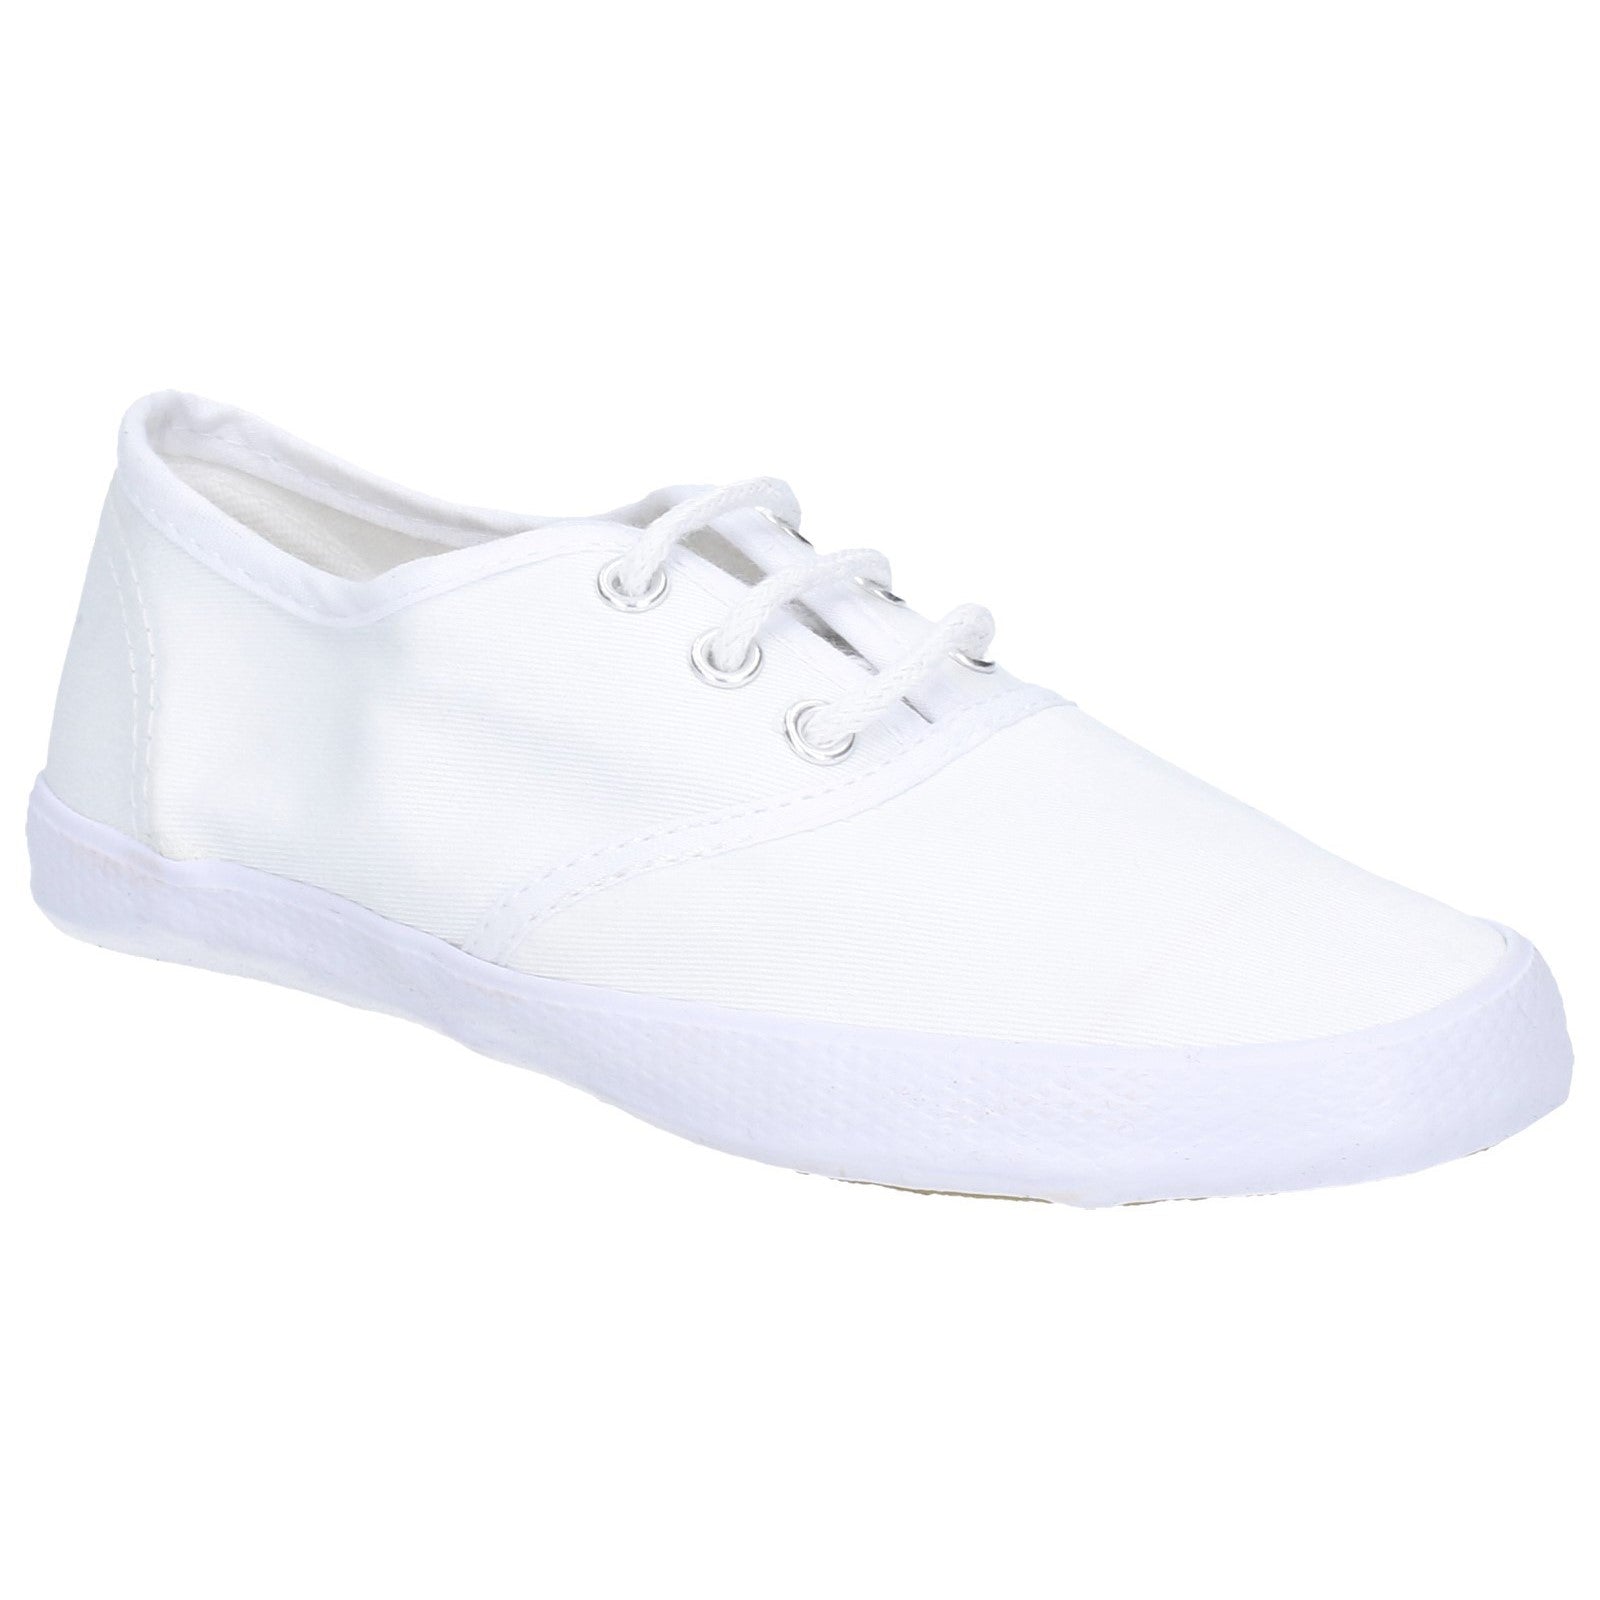 GB Plimsolls White Small, Group Five